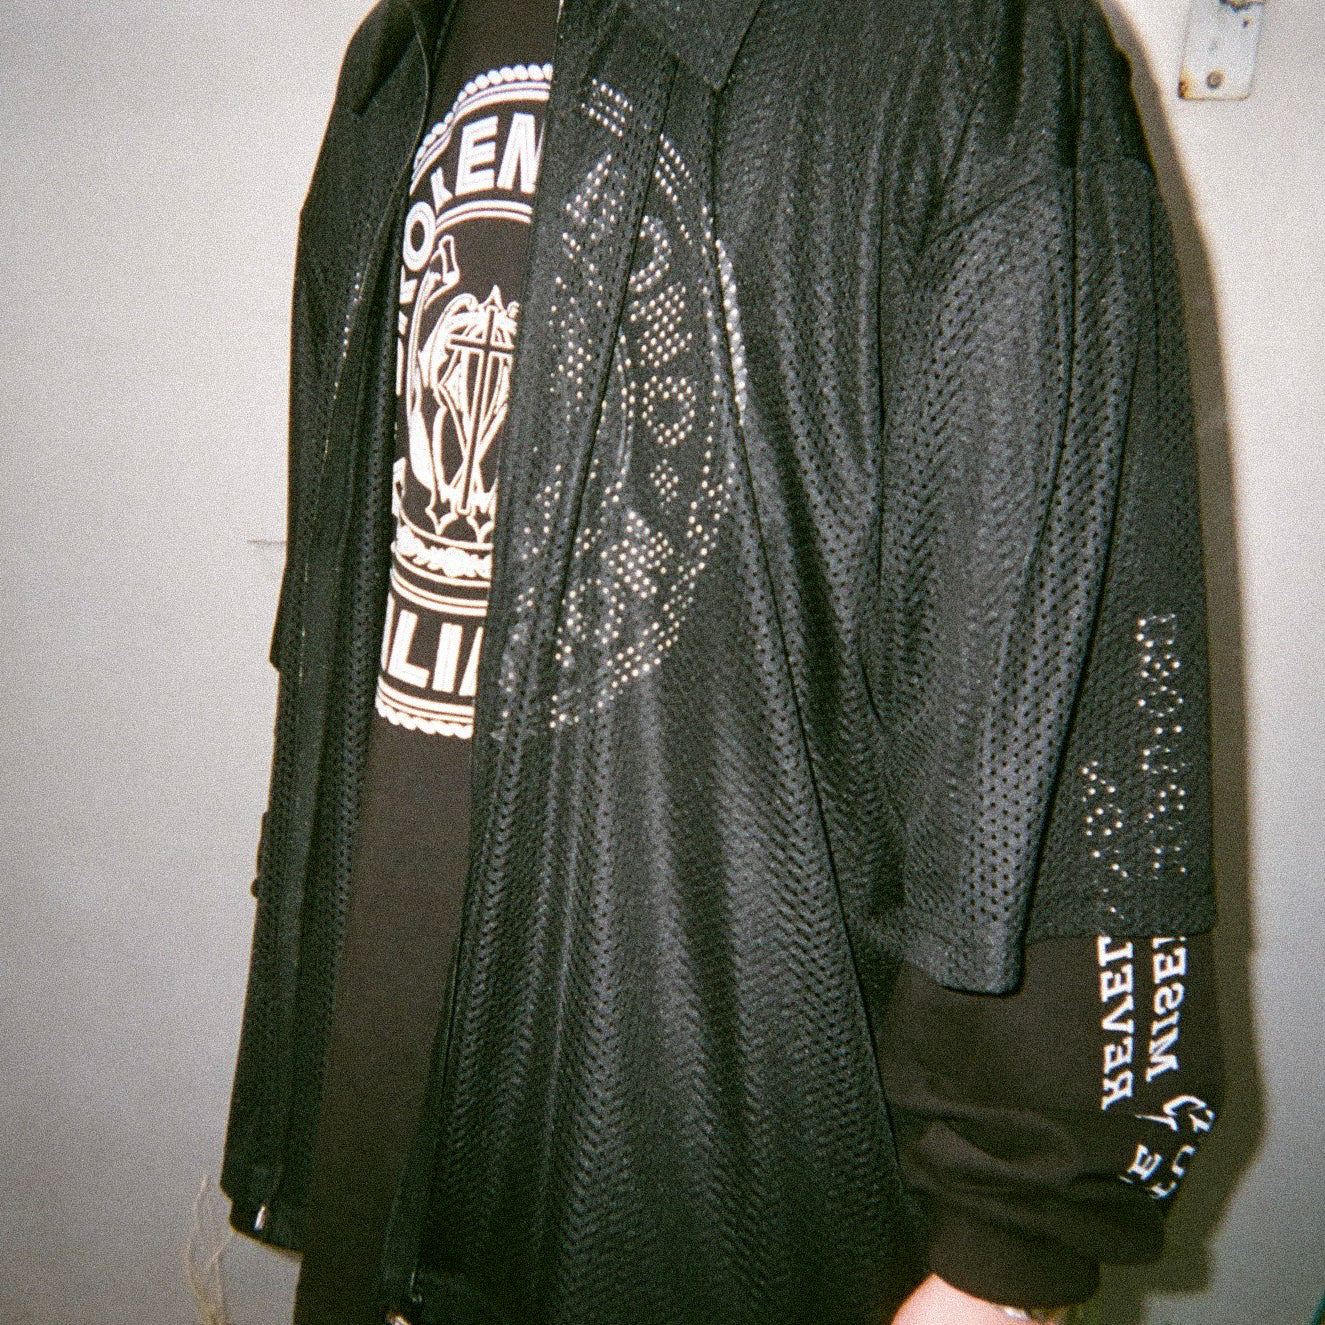 CCTB Exclusive】WILLY CHAVARRIA / MESH ZIP SHIRT SOLID BLACK